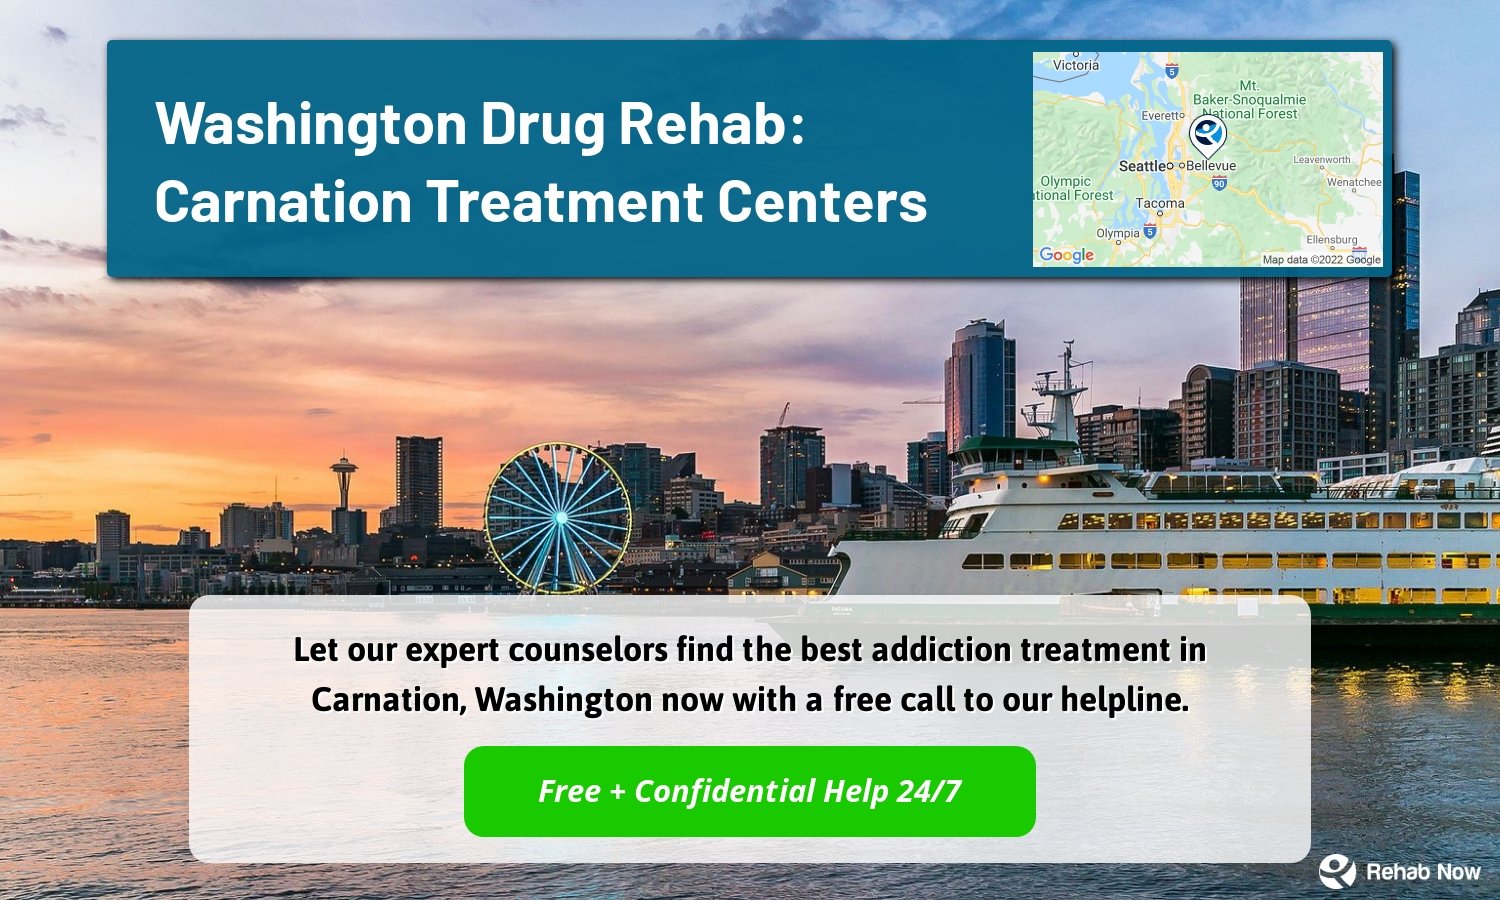 Let our expert counselors find the best addiction treatment in Carnation, Washington now with a free call to our helpline.